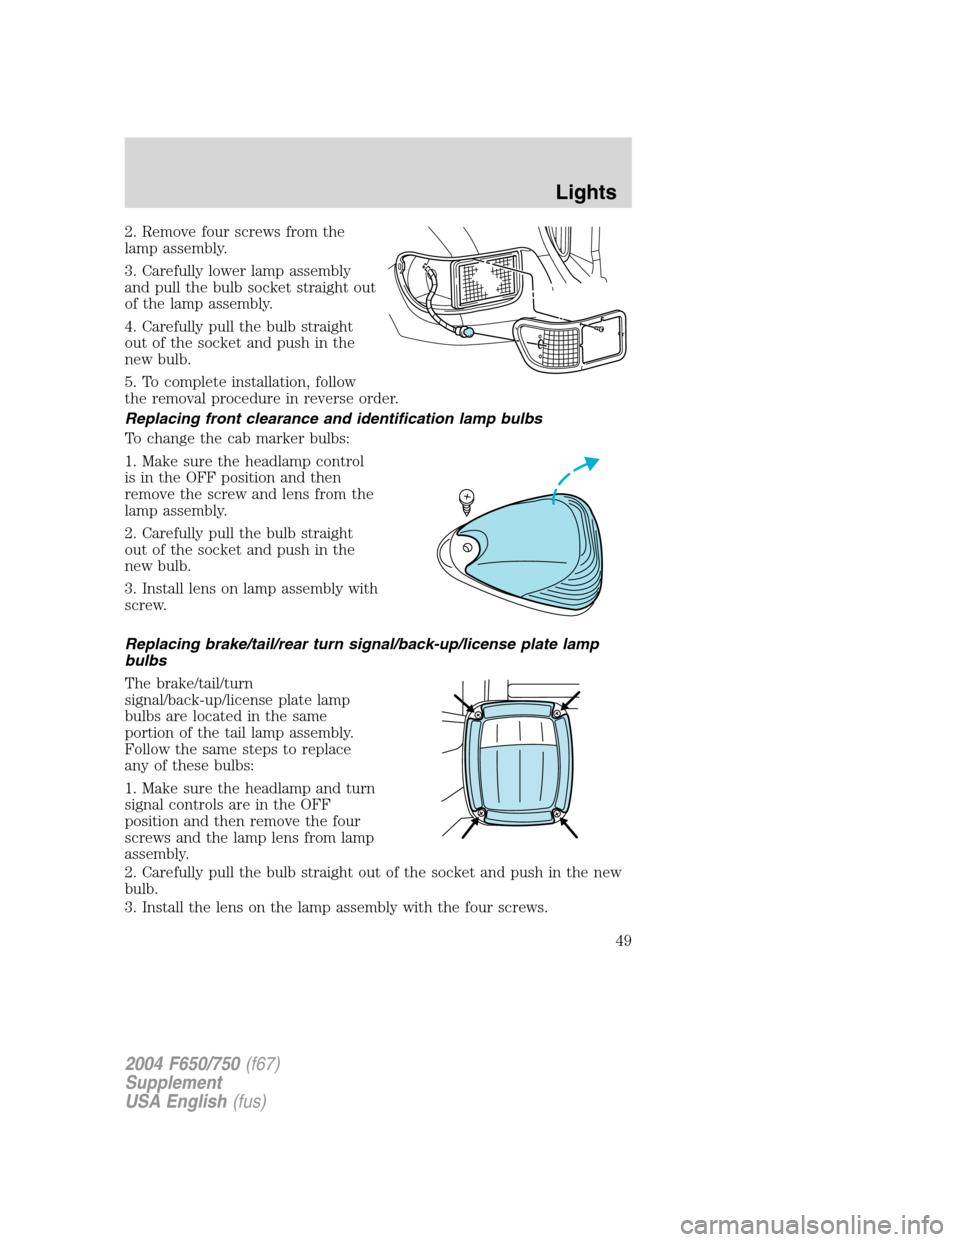 FORD F650 2004 11.G Owners Manual 2. Remove four screws from the
lamp assembly.
3. Carefully lower lamp assembly
and pull the bulb socket straight out
of the lamp assembly.
4. Carefully pull the bulb straight
out of the socket and pus